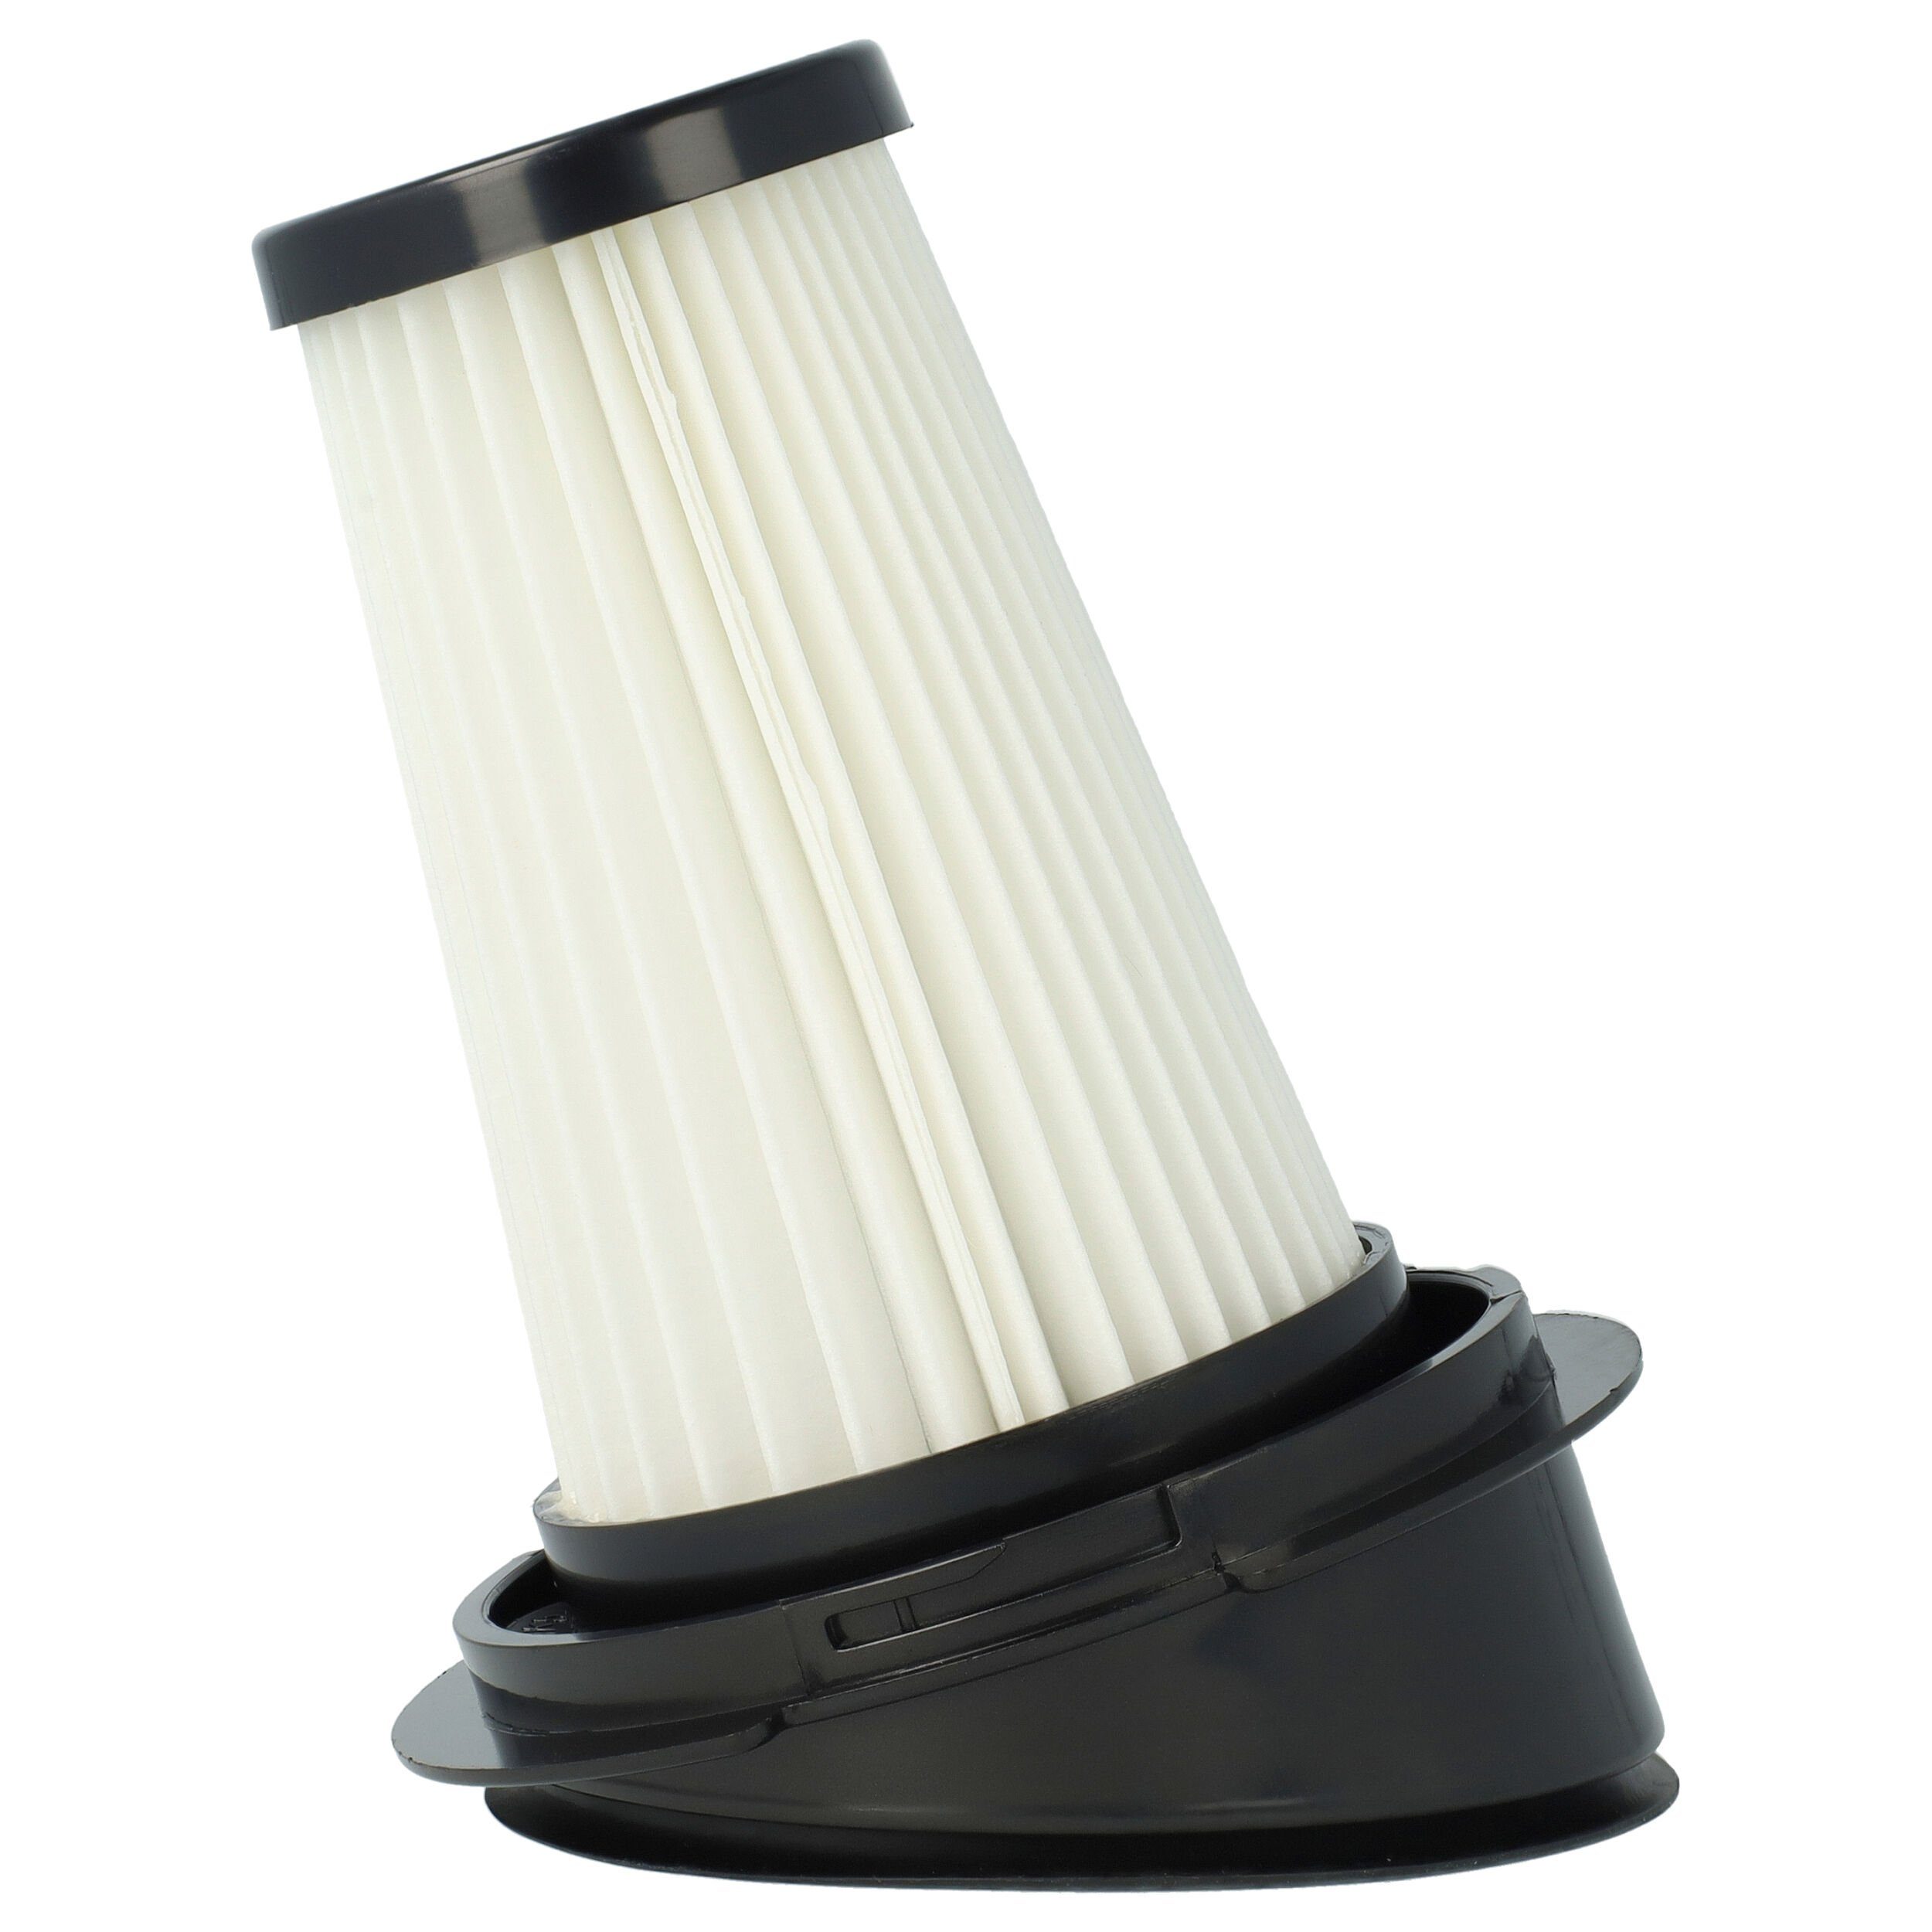 vhbw Vacuum Cleaner Filter compatible with Arnica Bora 4000, 5000